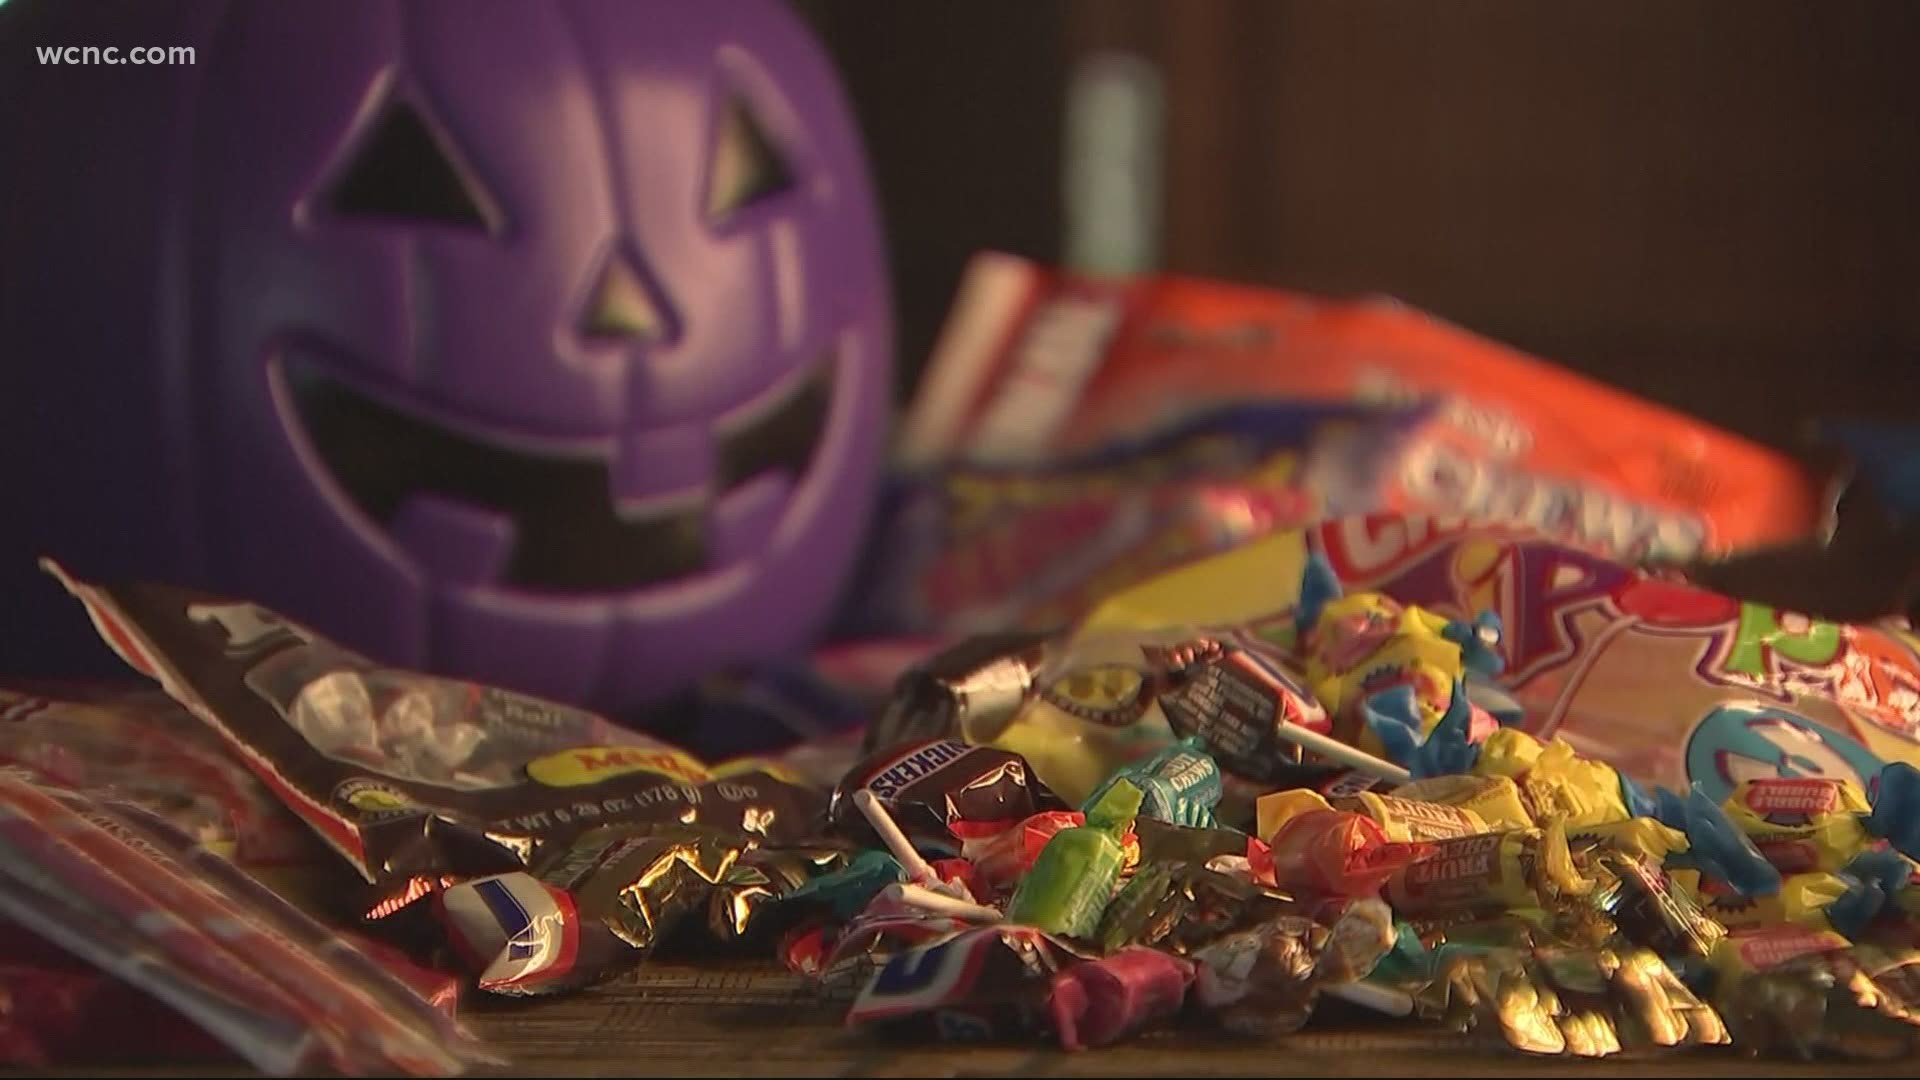 Health experts suggest making changes to the candy distribution process to make it safer amid the pandemic.